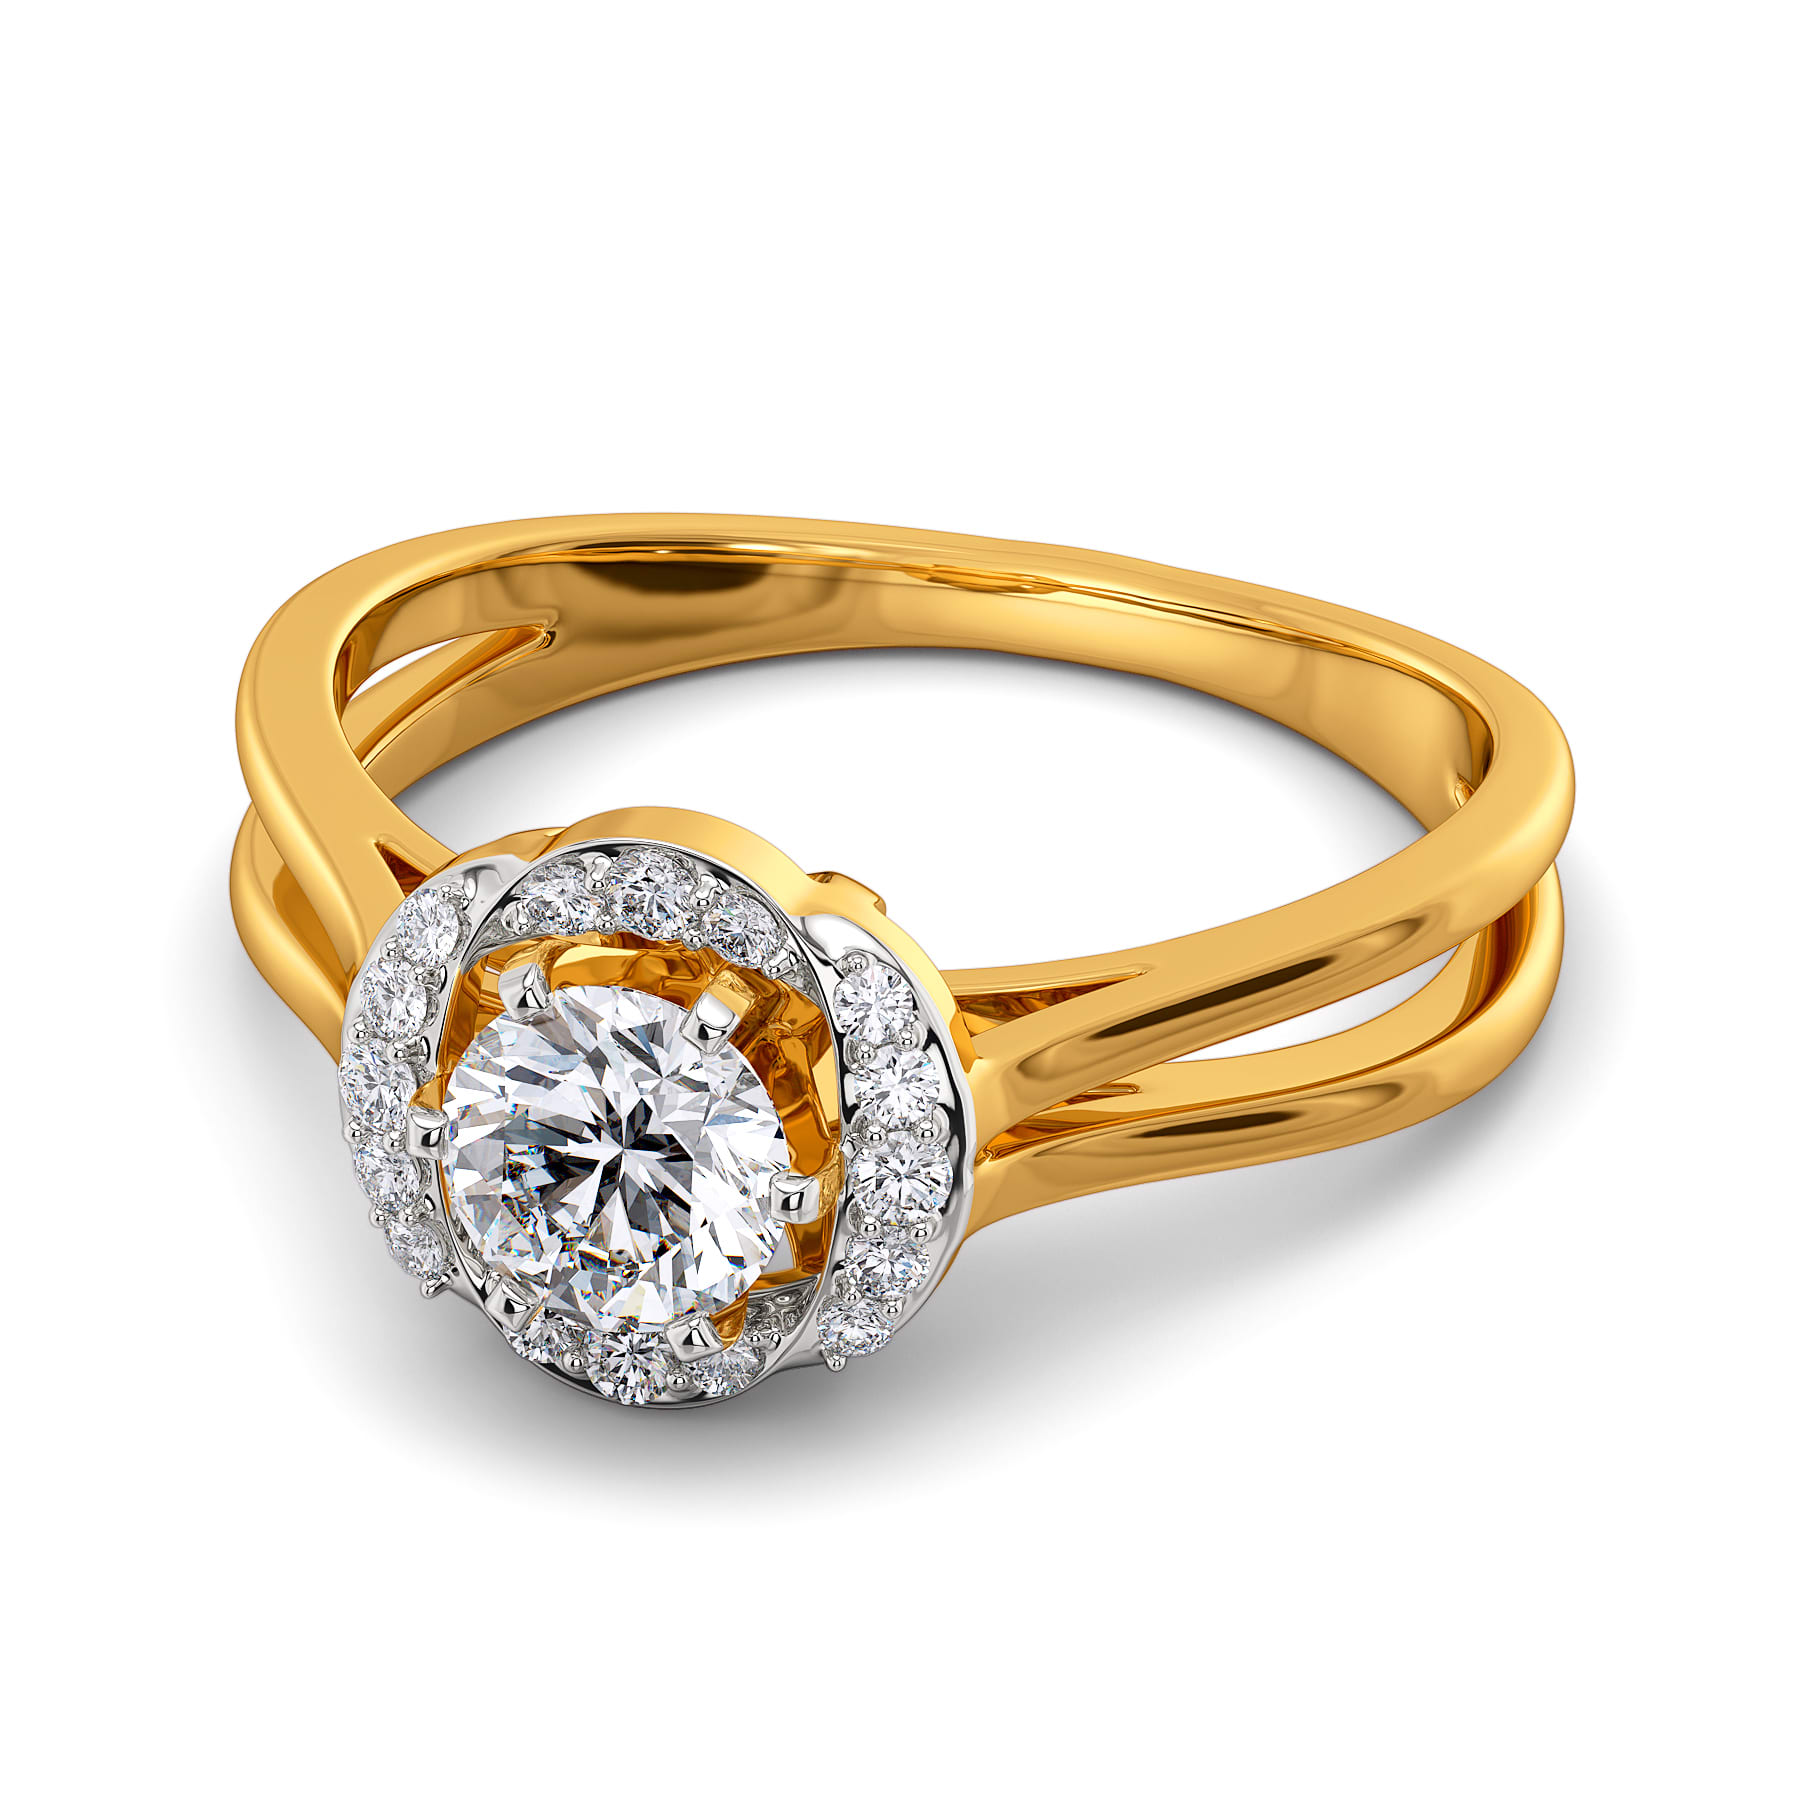 A Sneak Peek Into Wedding and Engagement Ring Metals